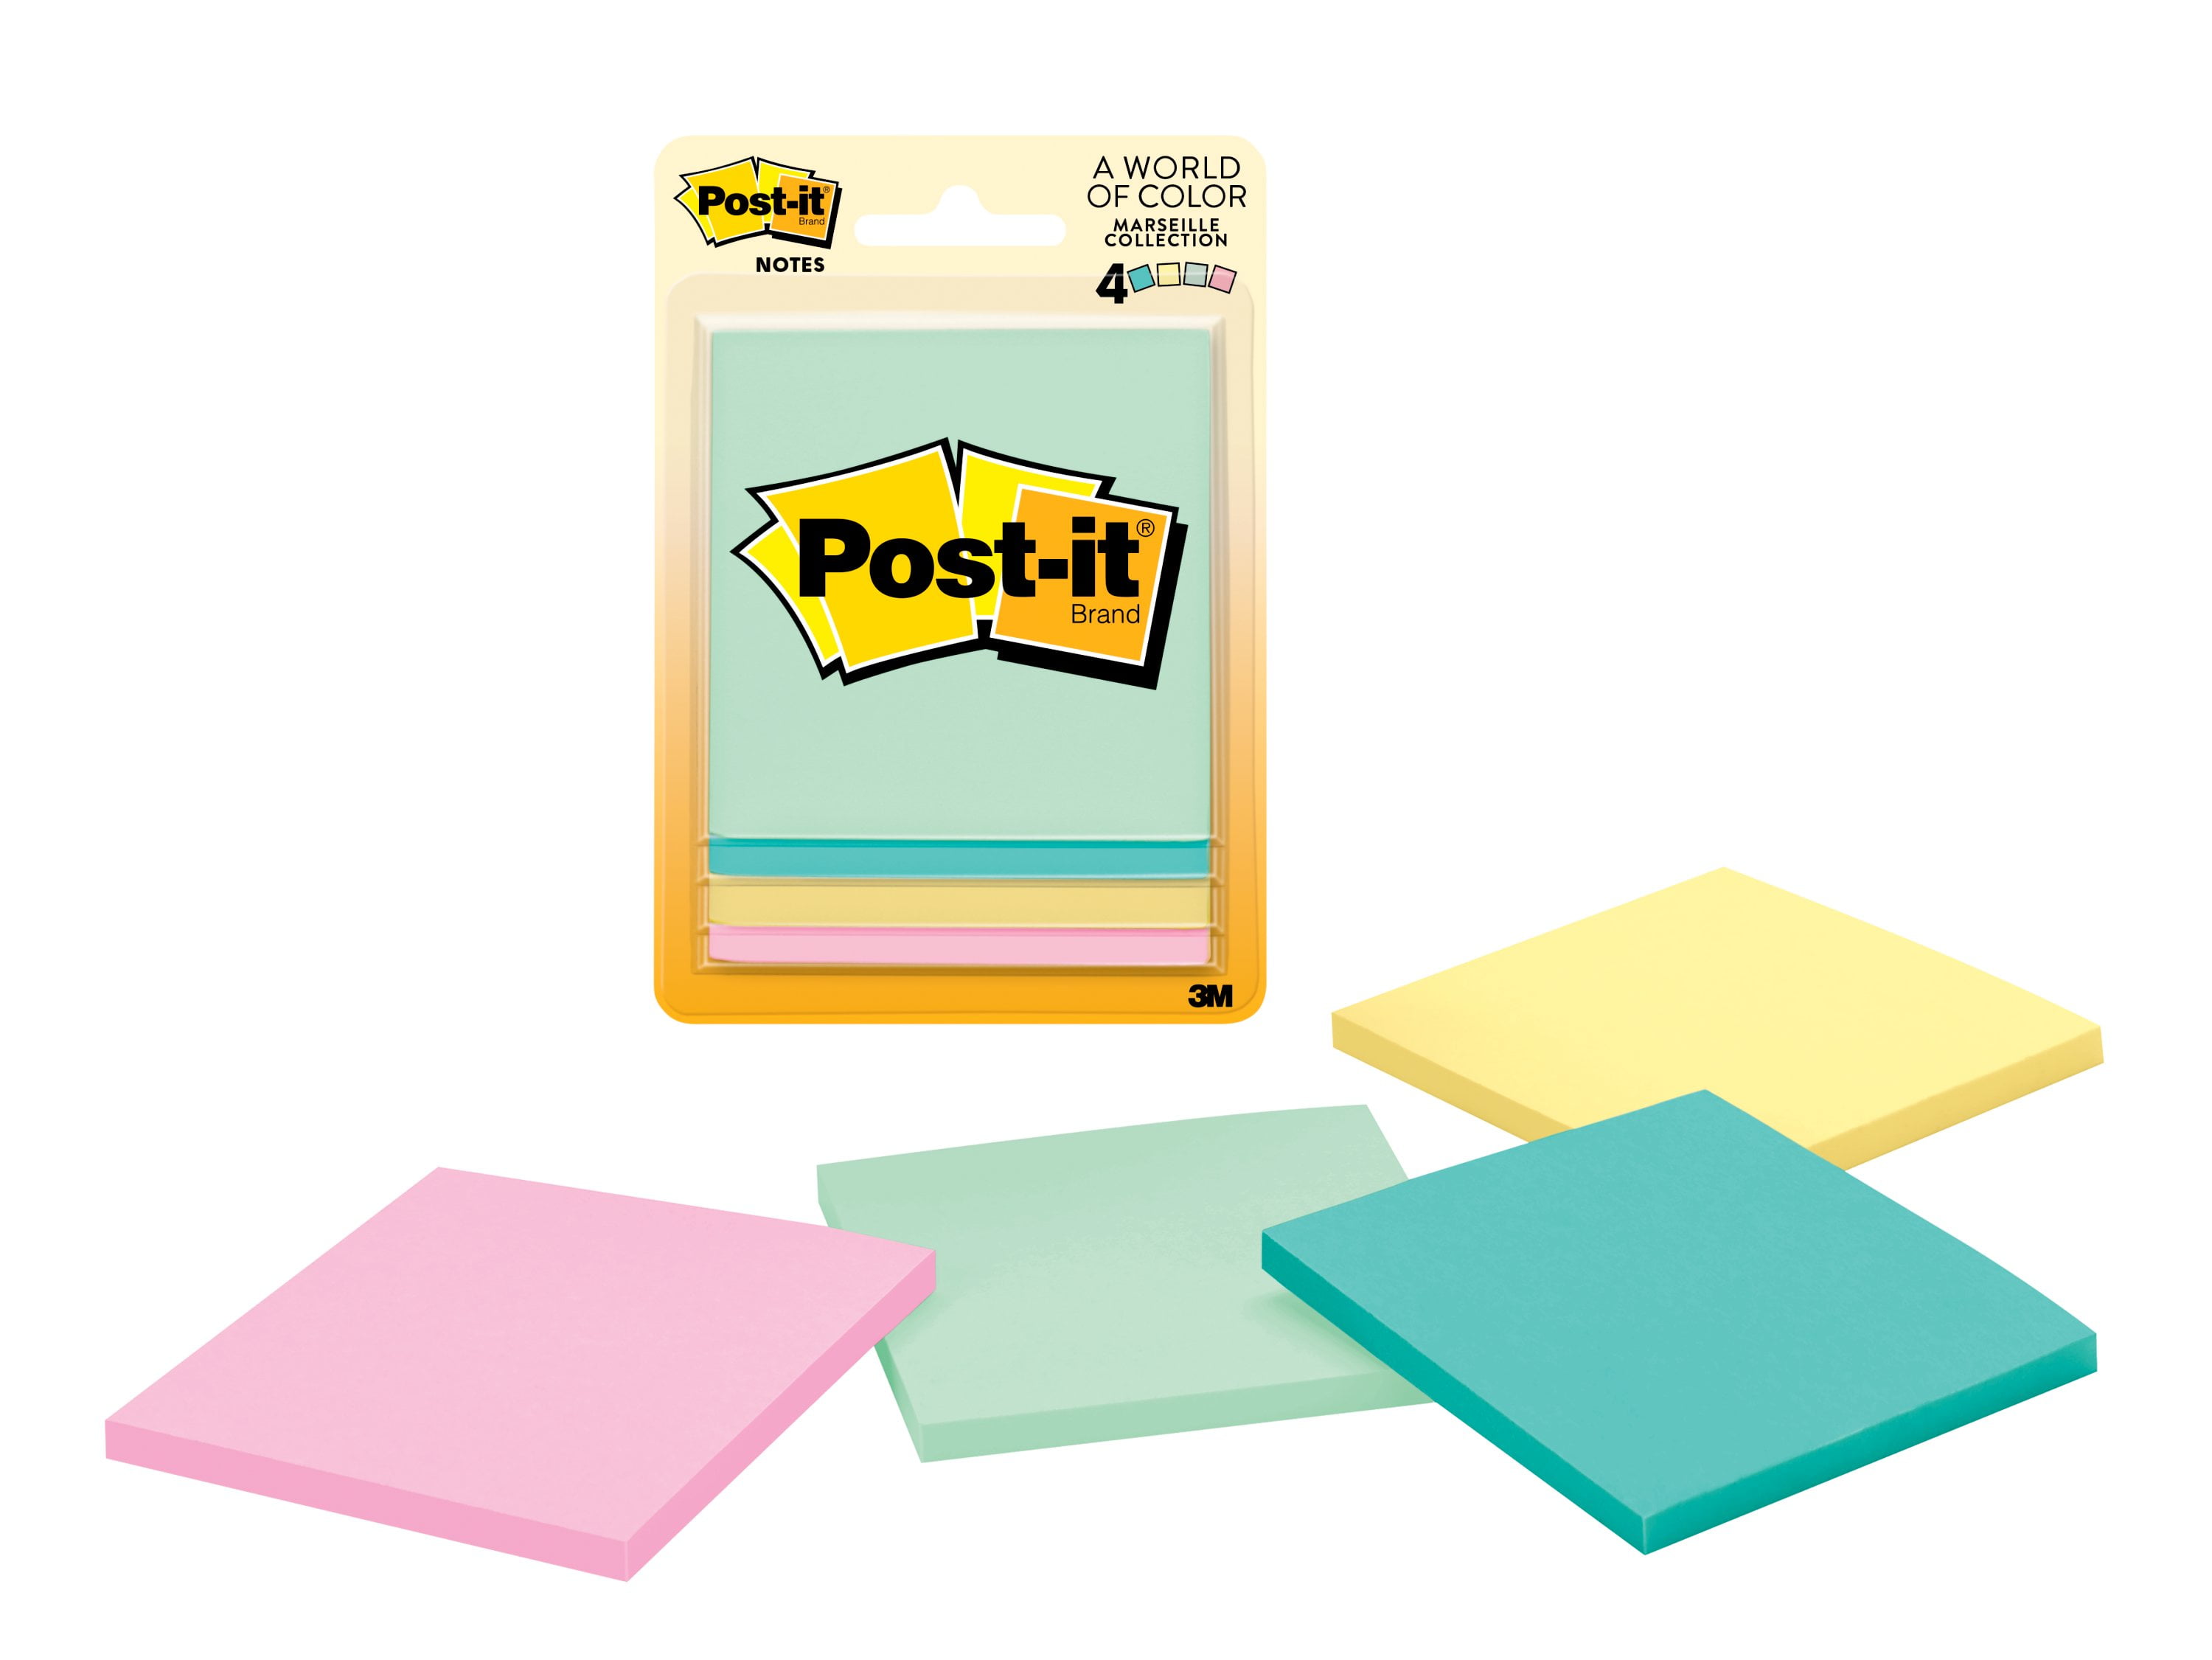 Transparent Sticky Notes Clear Sticky Notes Waterproof Sticky Notes For  Students & Home 50PCS Super Sticky Notes Variety Memo Pads Cute Flip Chart  Paper with Sticky Back Large Paper Pad Large Note 